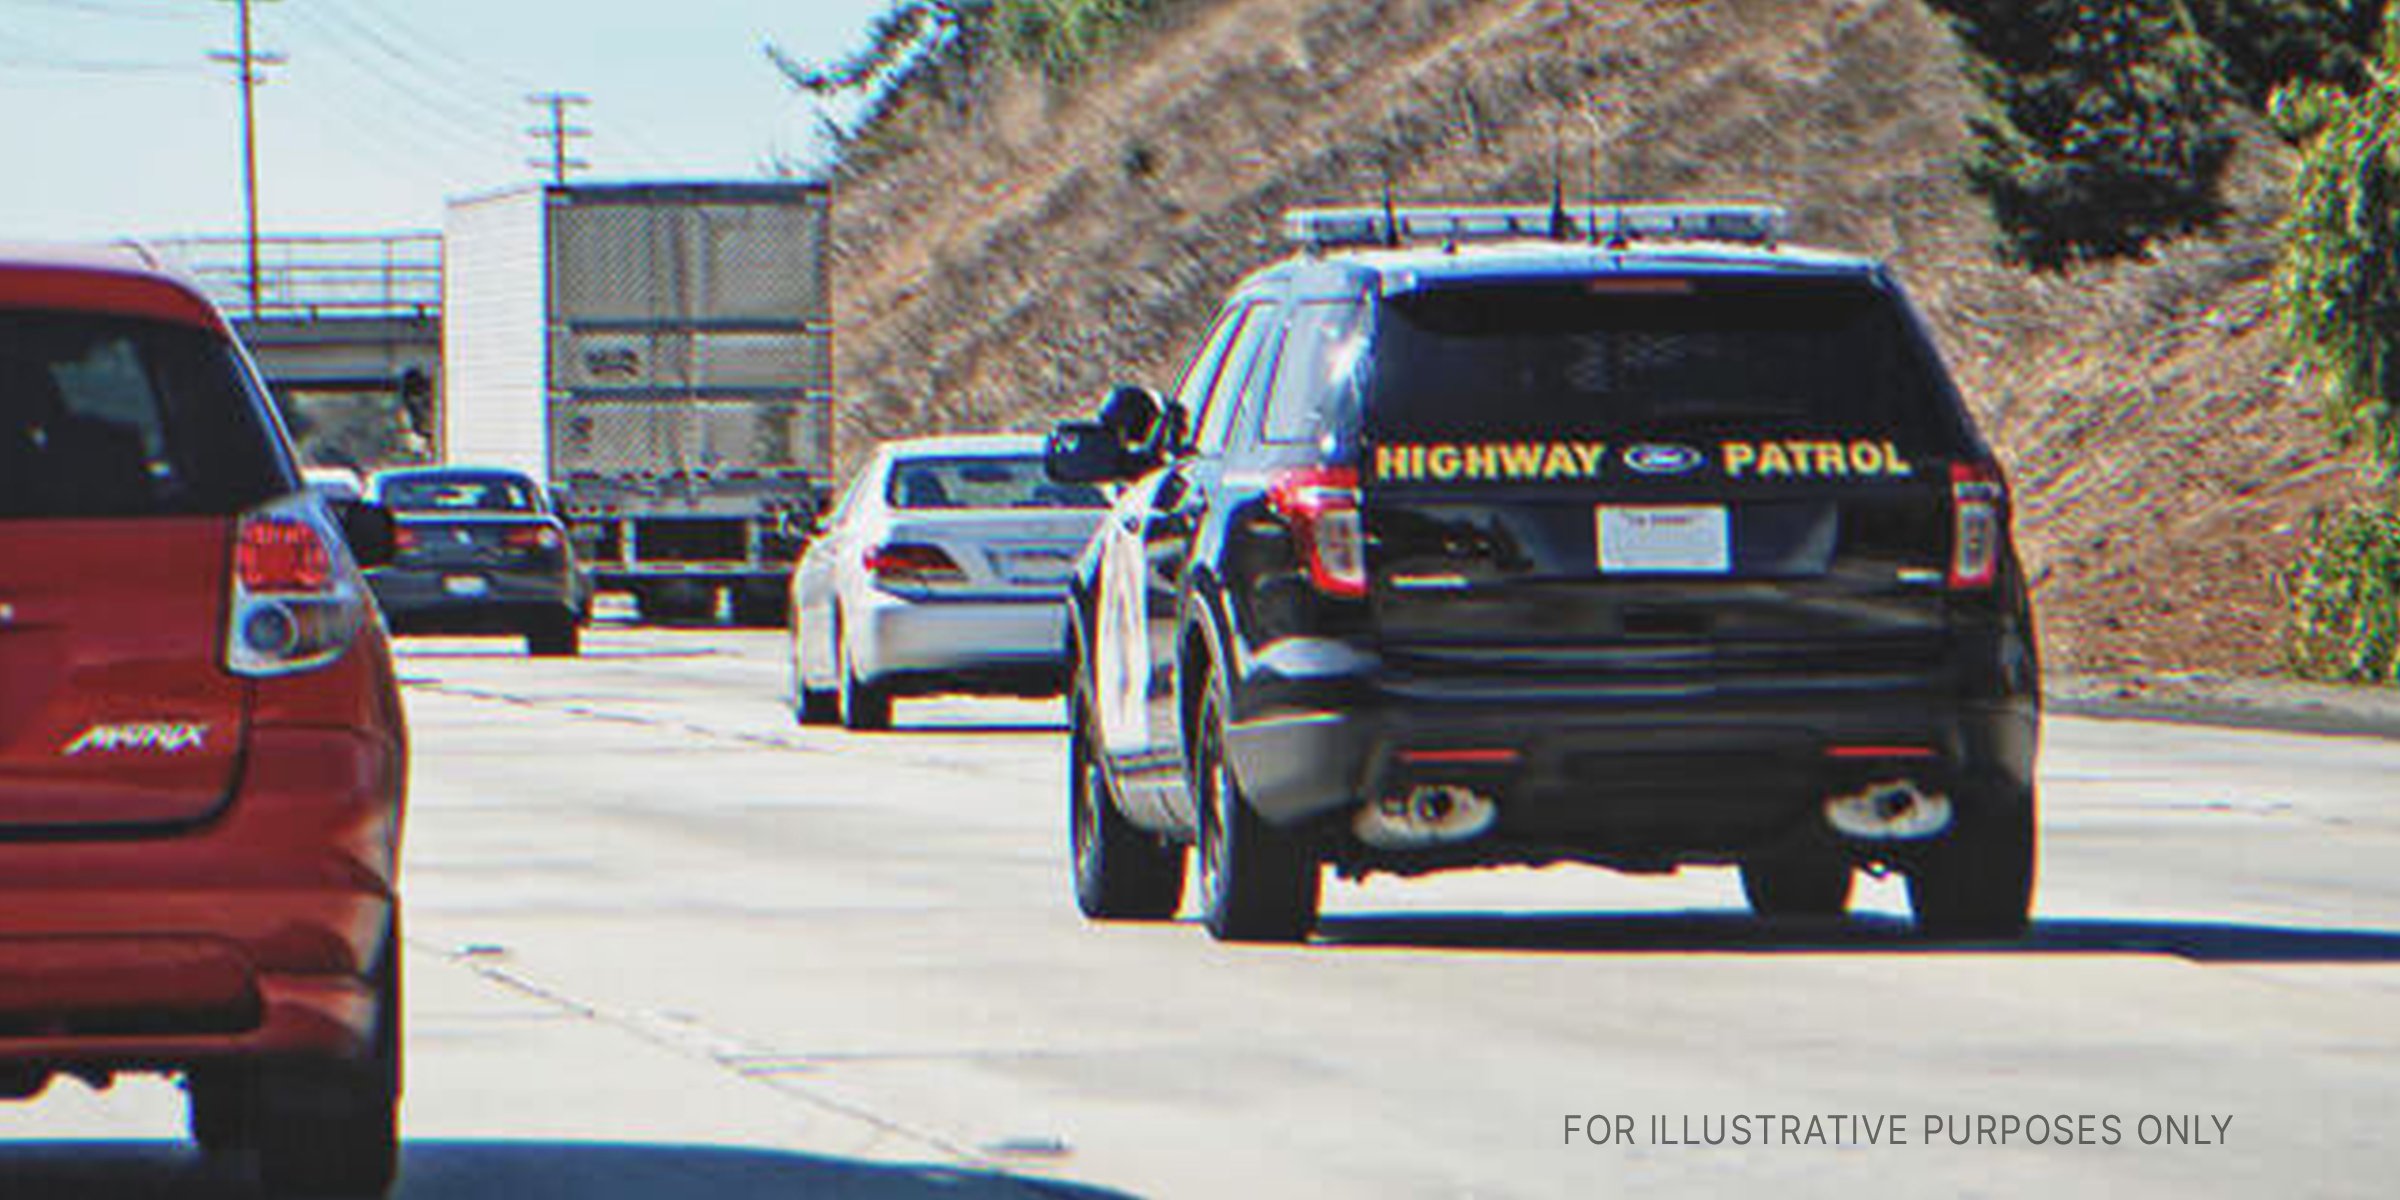 A highway patrol car driving on a highway | Source: Flickr / Chris Yarzab (CC BY 2.0)